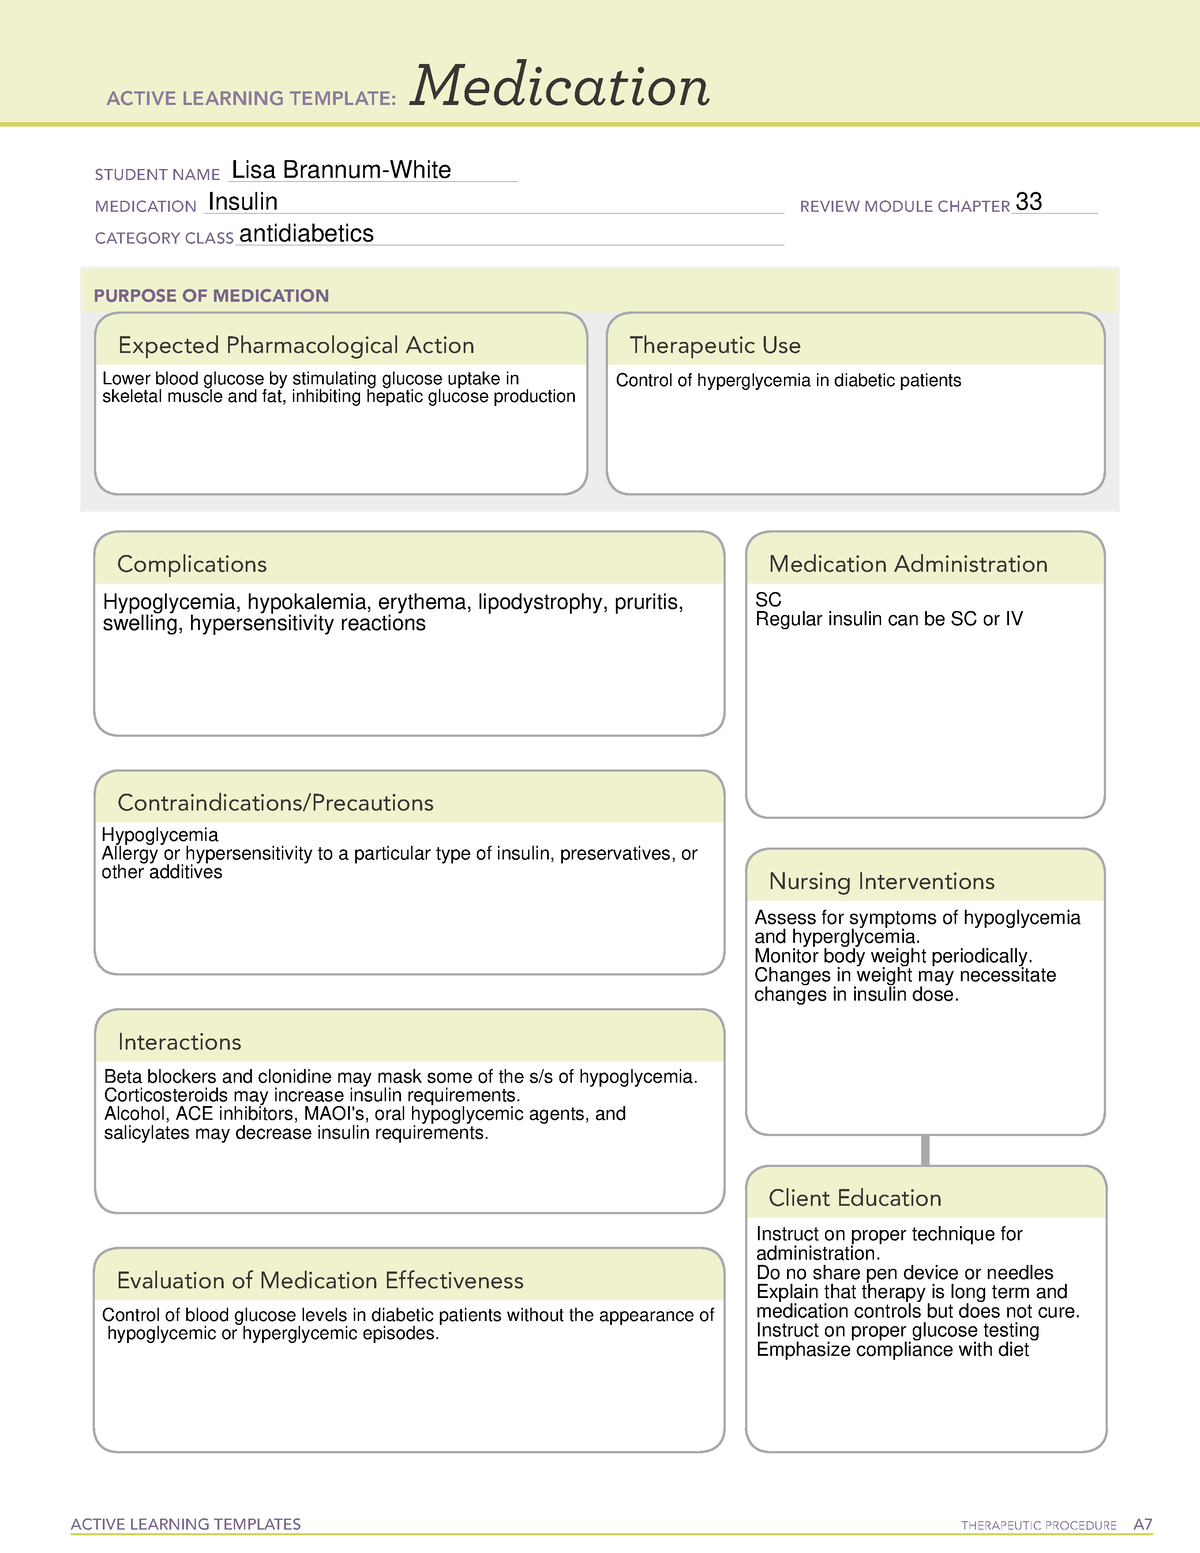 Active Learning Template medication 2 ACTIVE LEARNING TEMPLATES